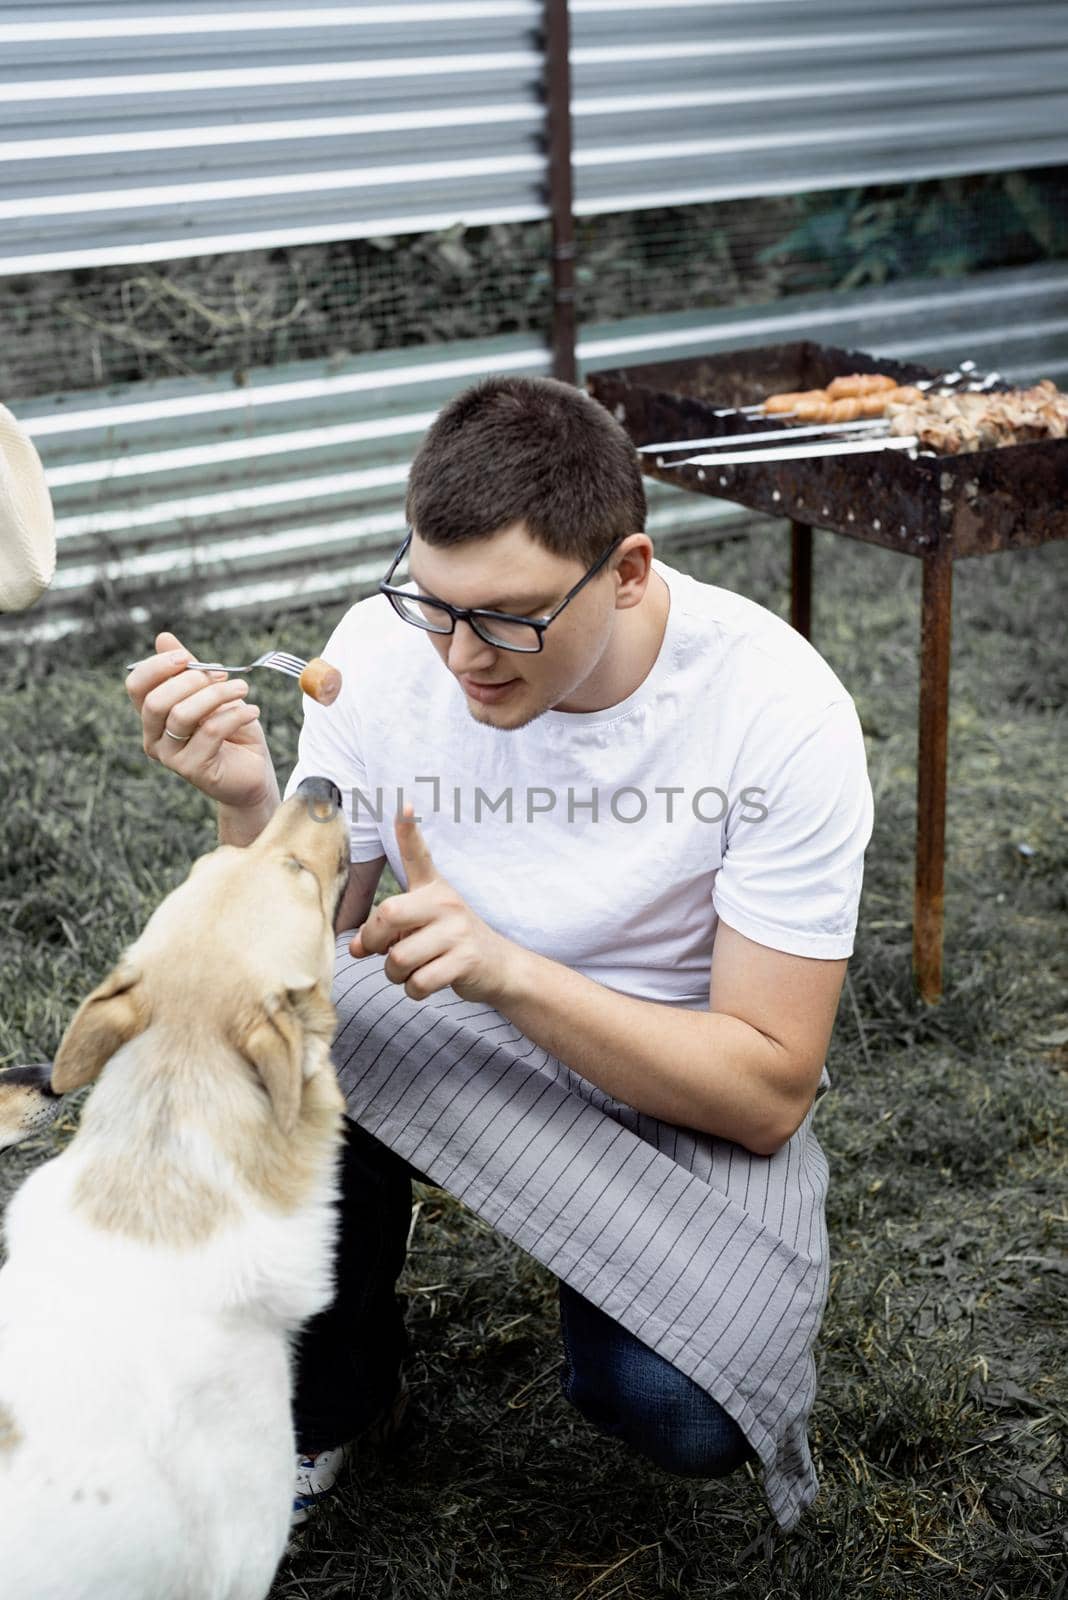 Caucasian man gives a snack to his dog, walking outdoors by Desperada